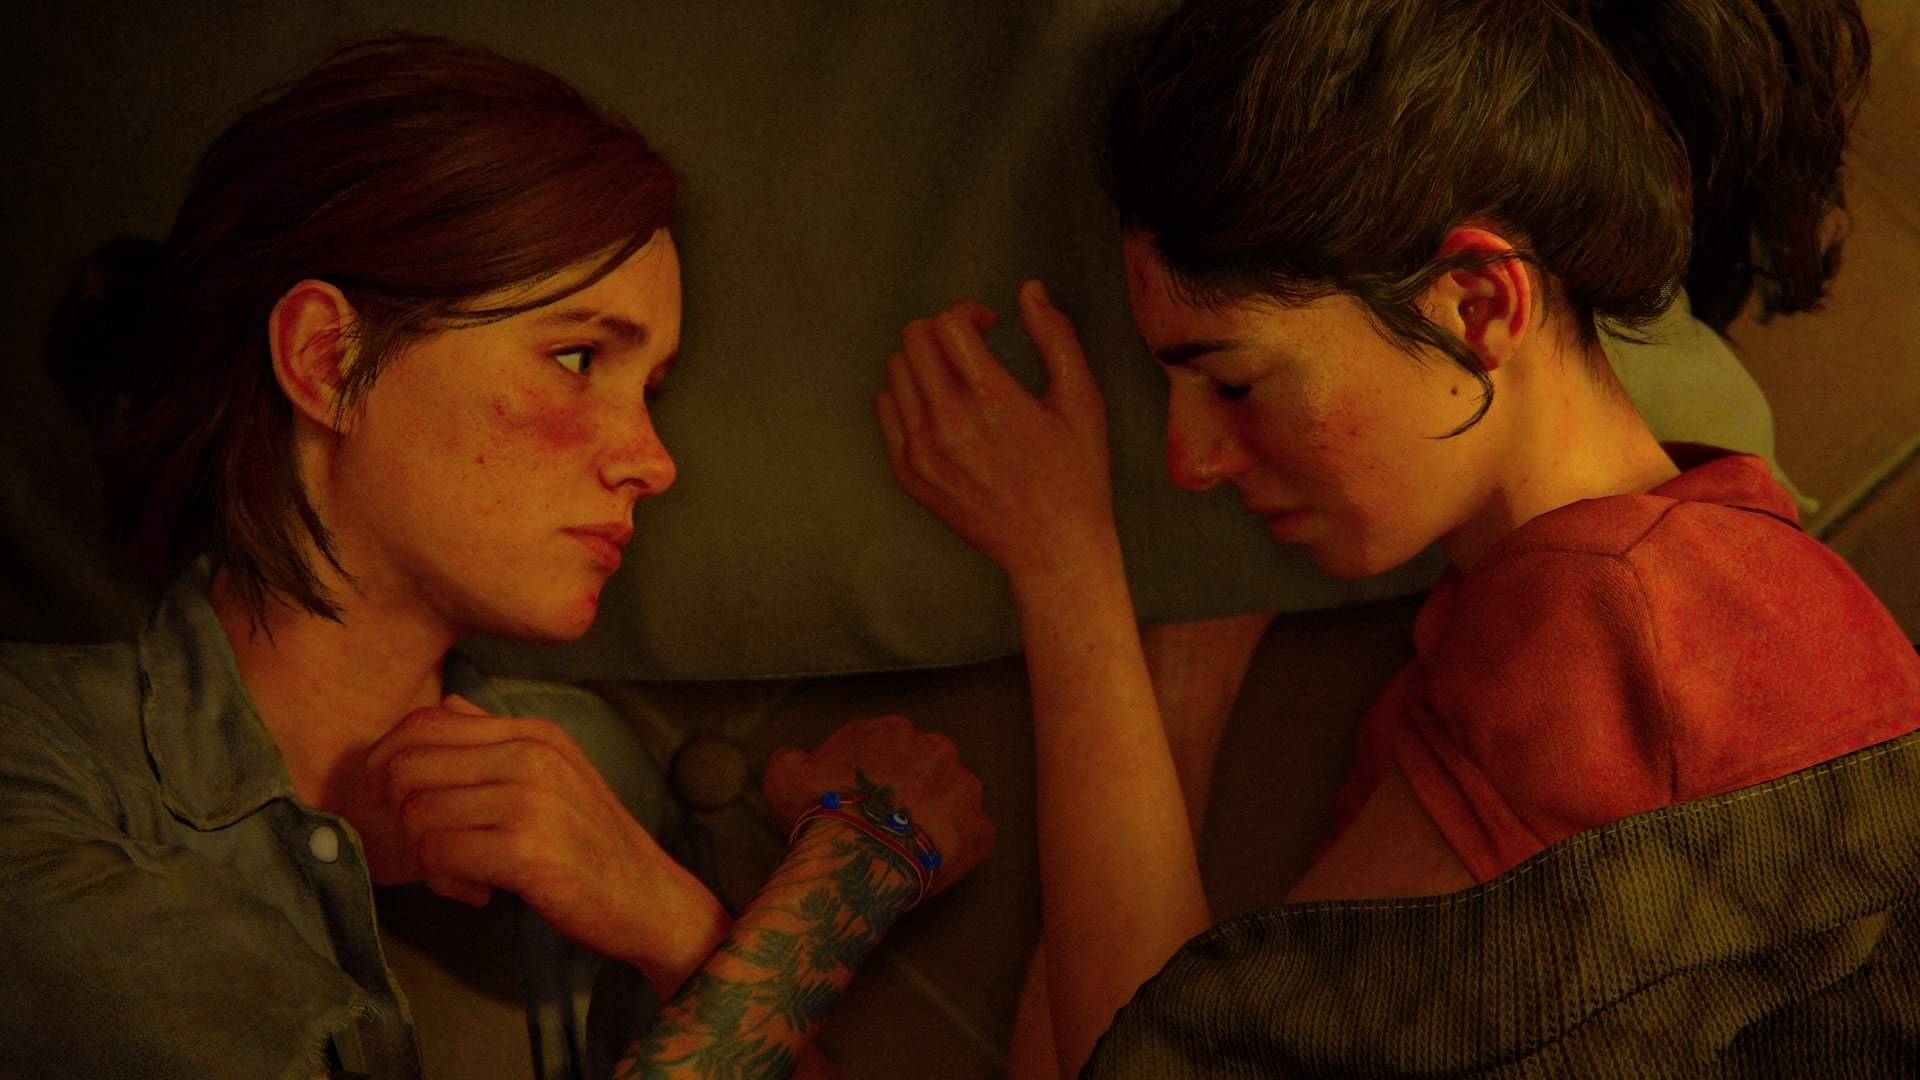 The Last of Us Part II' brings queer stories to a pandemic-ravaged dystopia